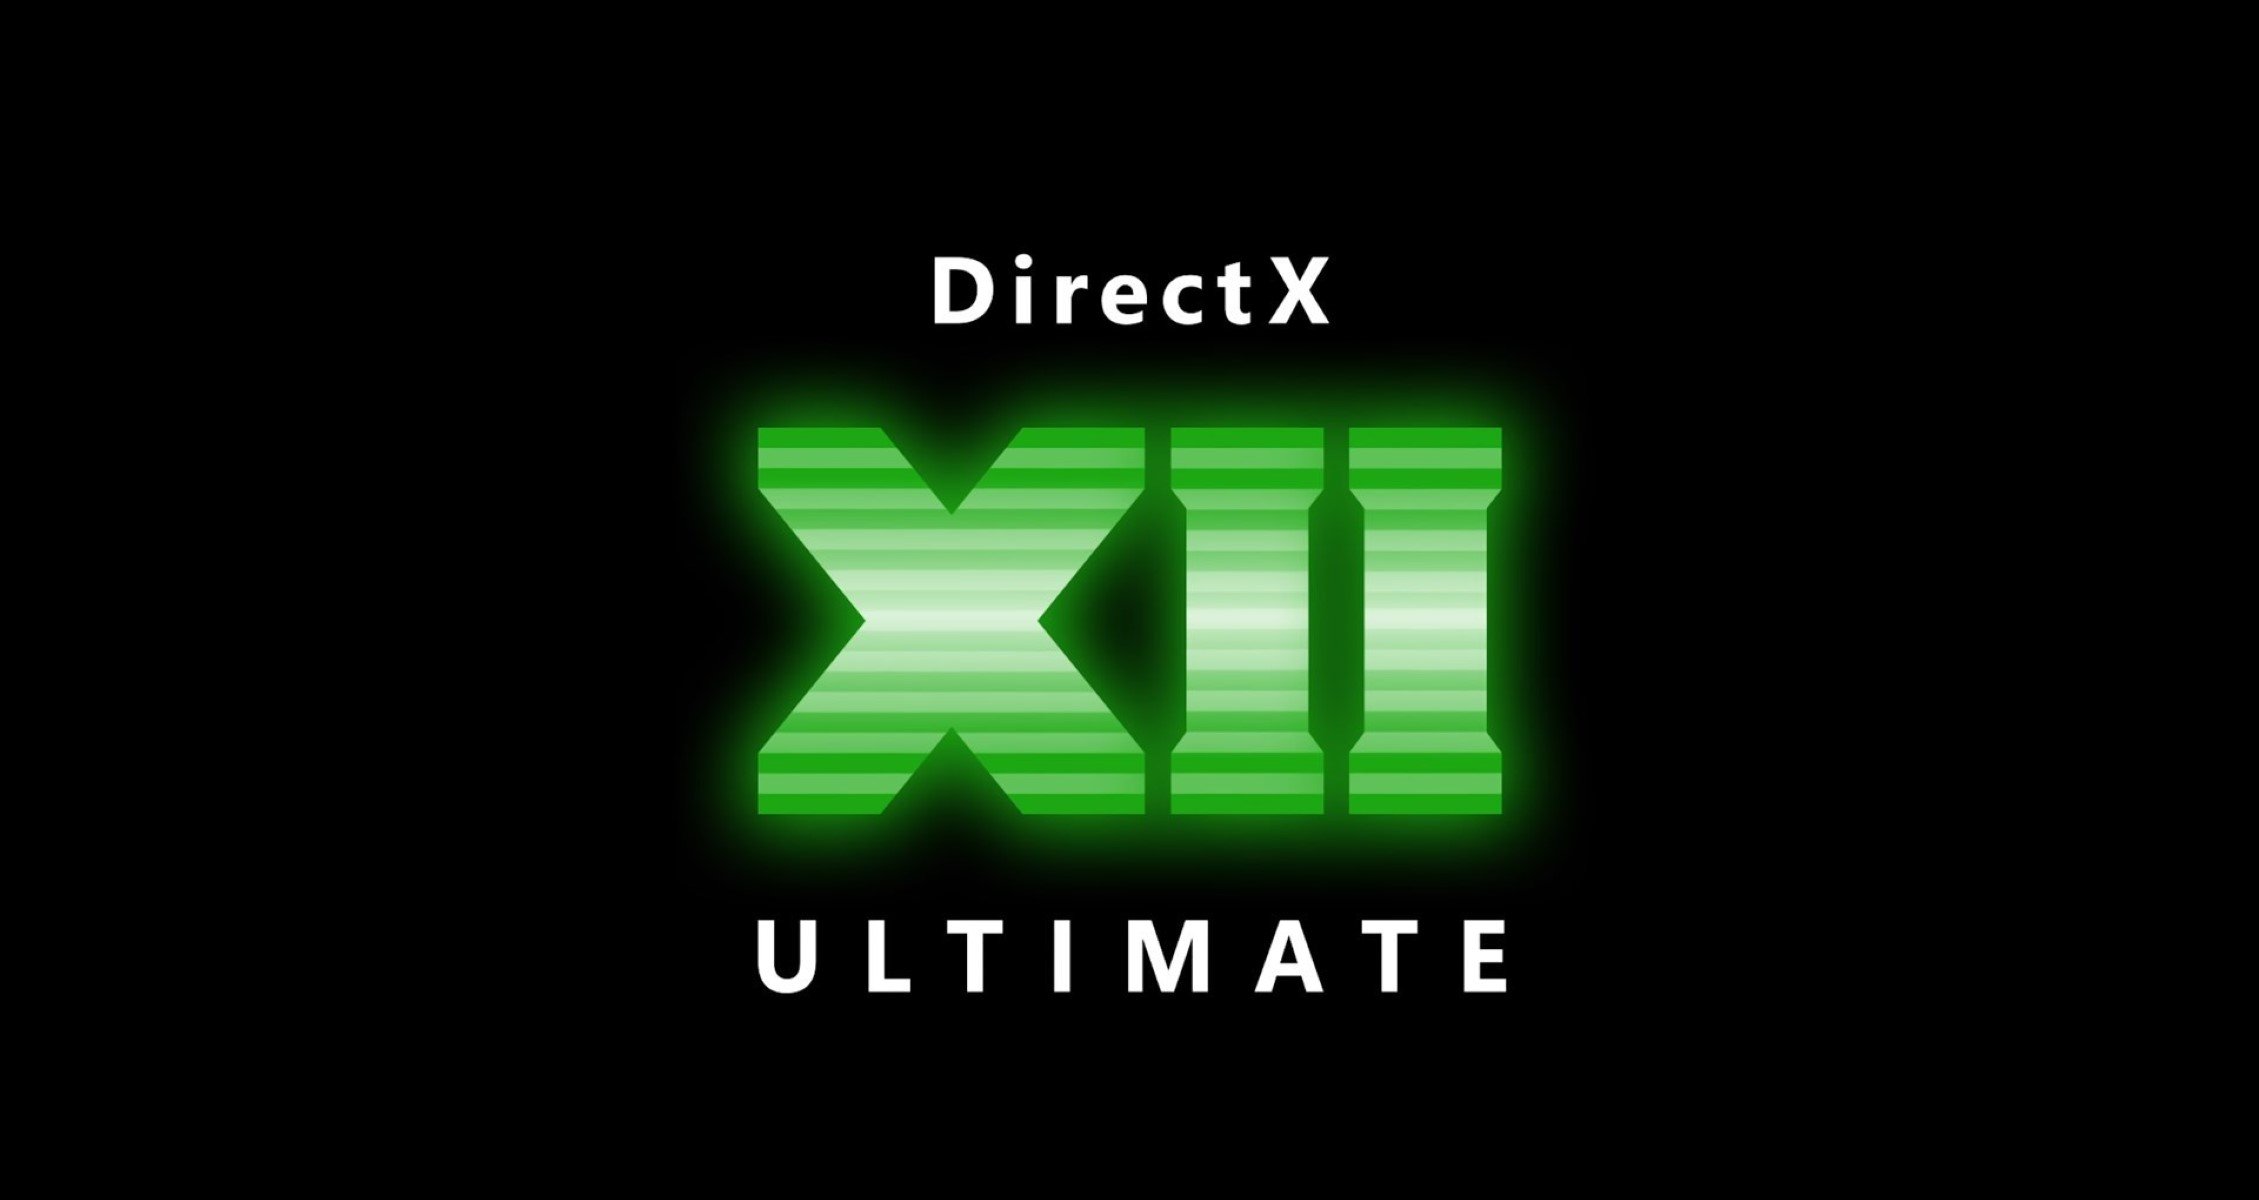 How to Enable DirectX 12 Ultimate & Use It if It's Disabled